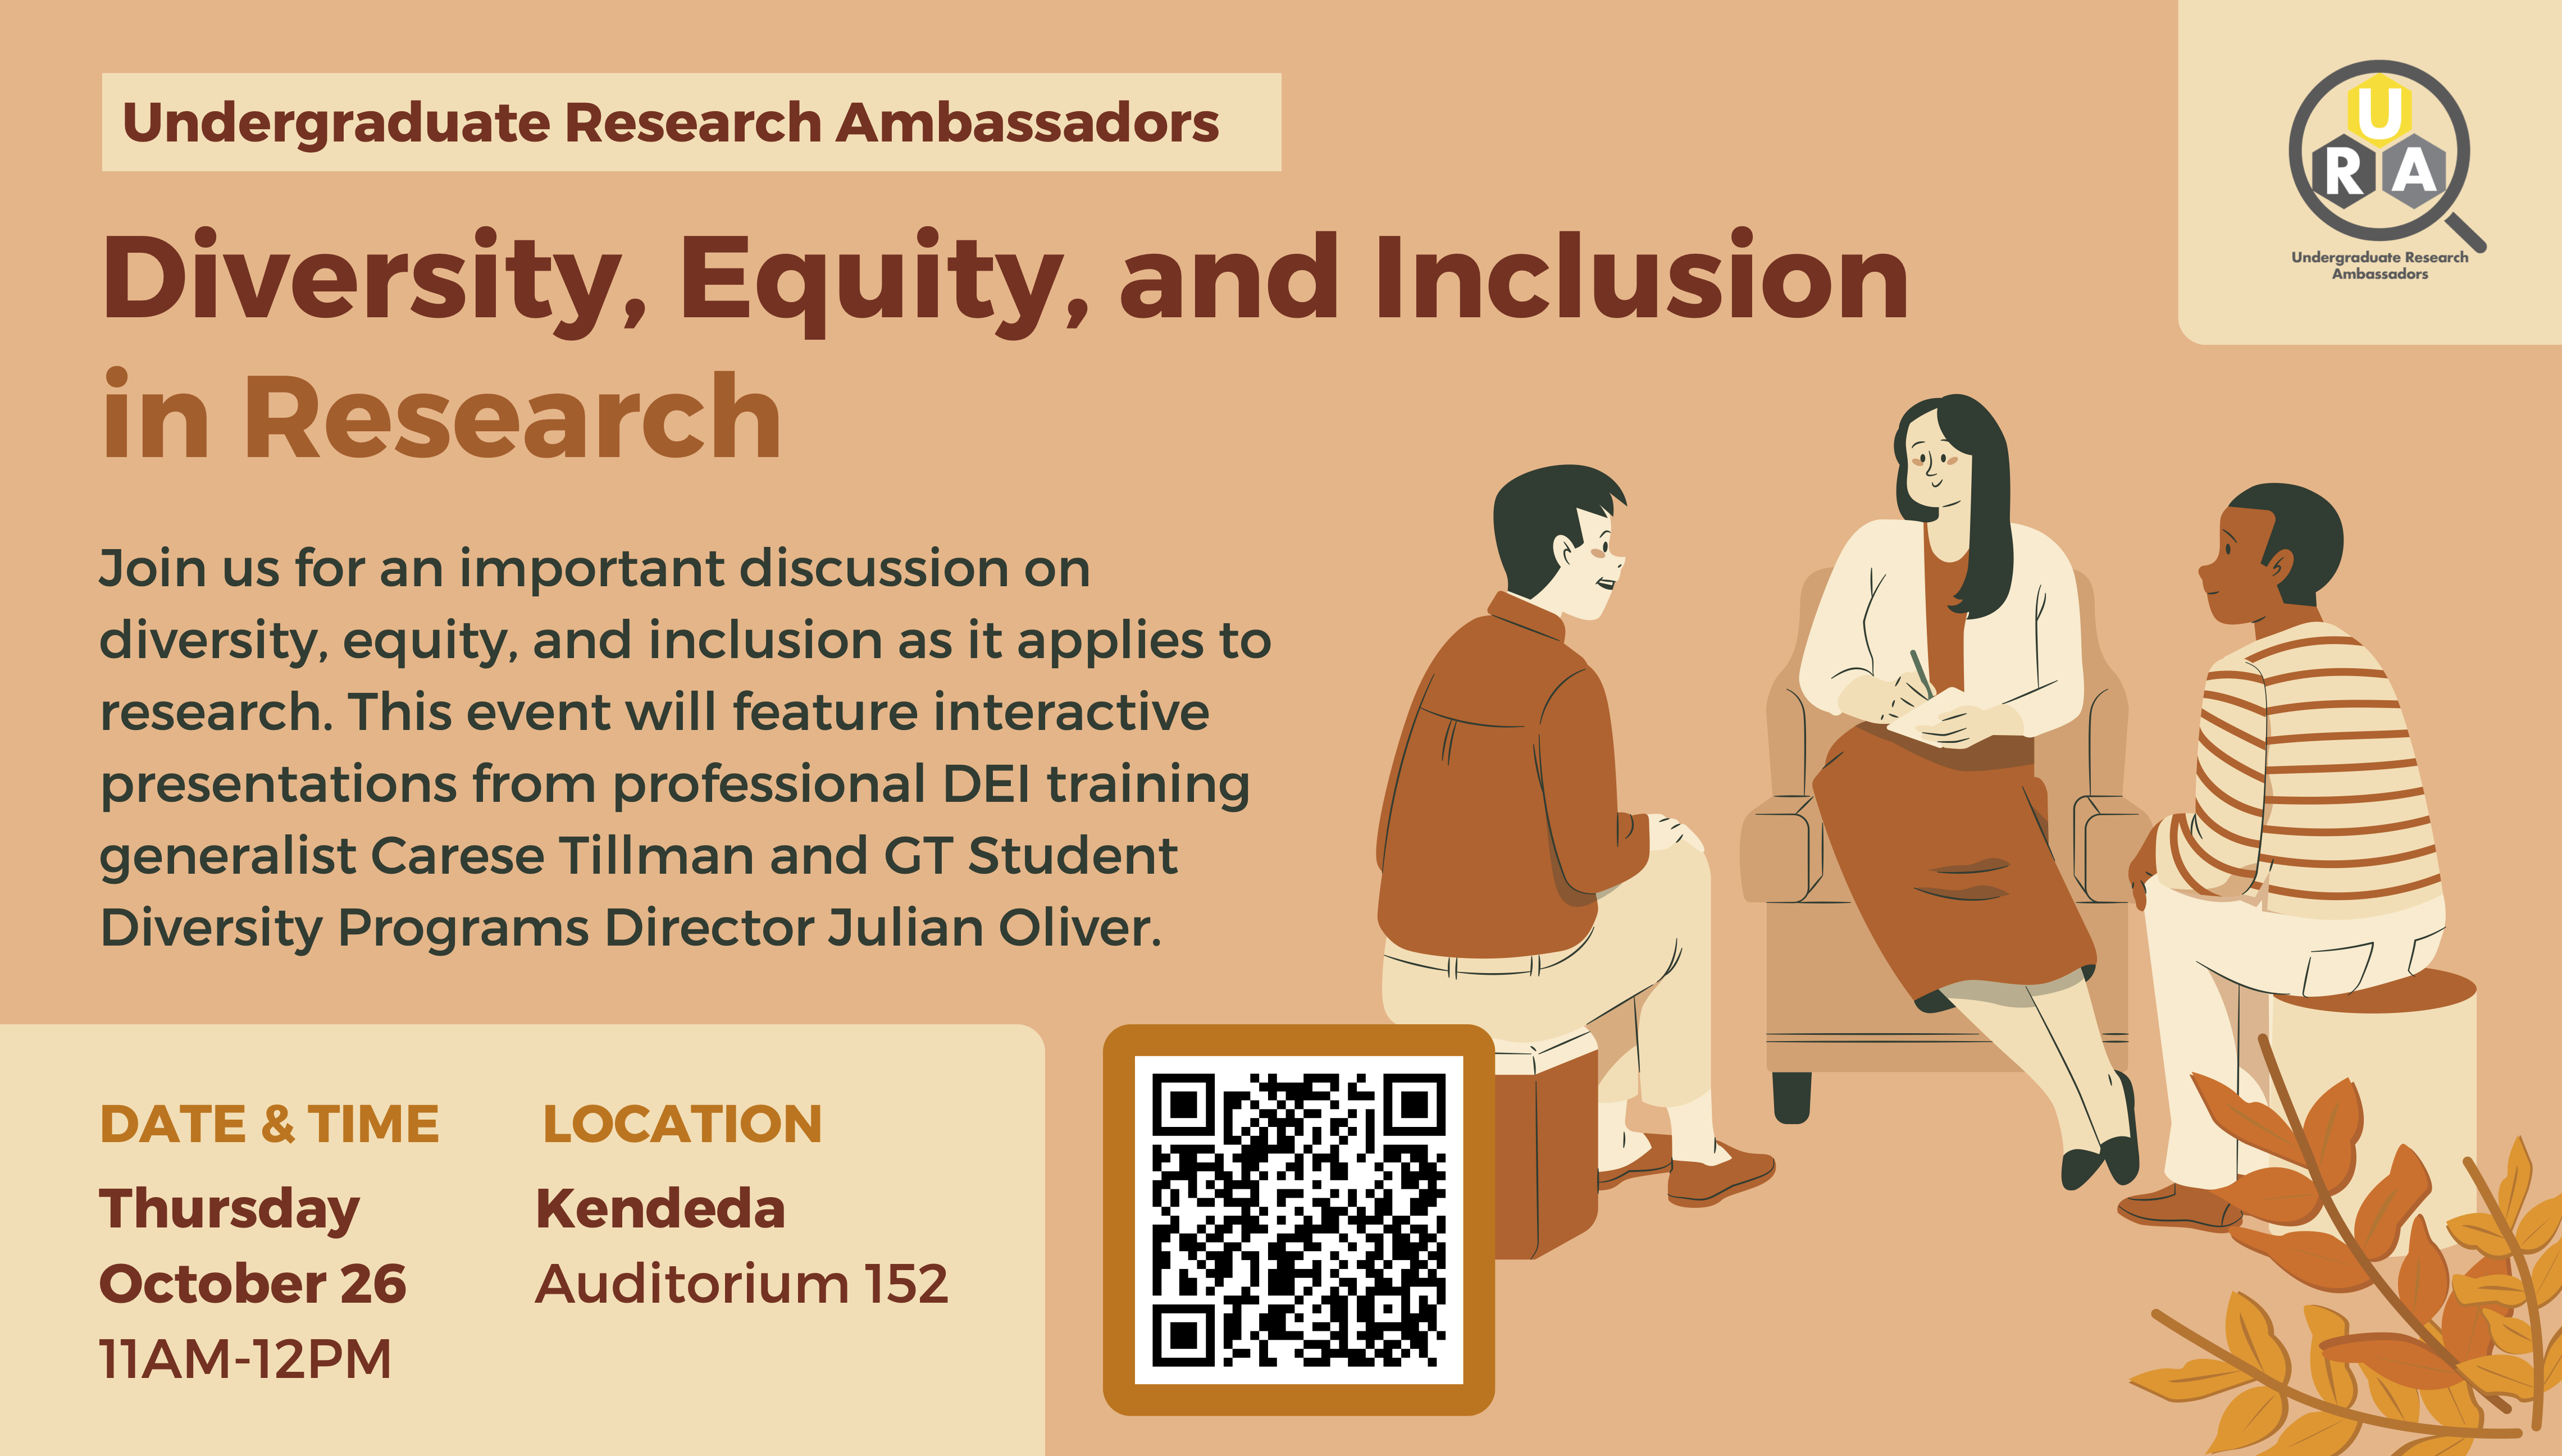 Diversity, Equity, and Inclusion in Research